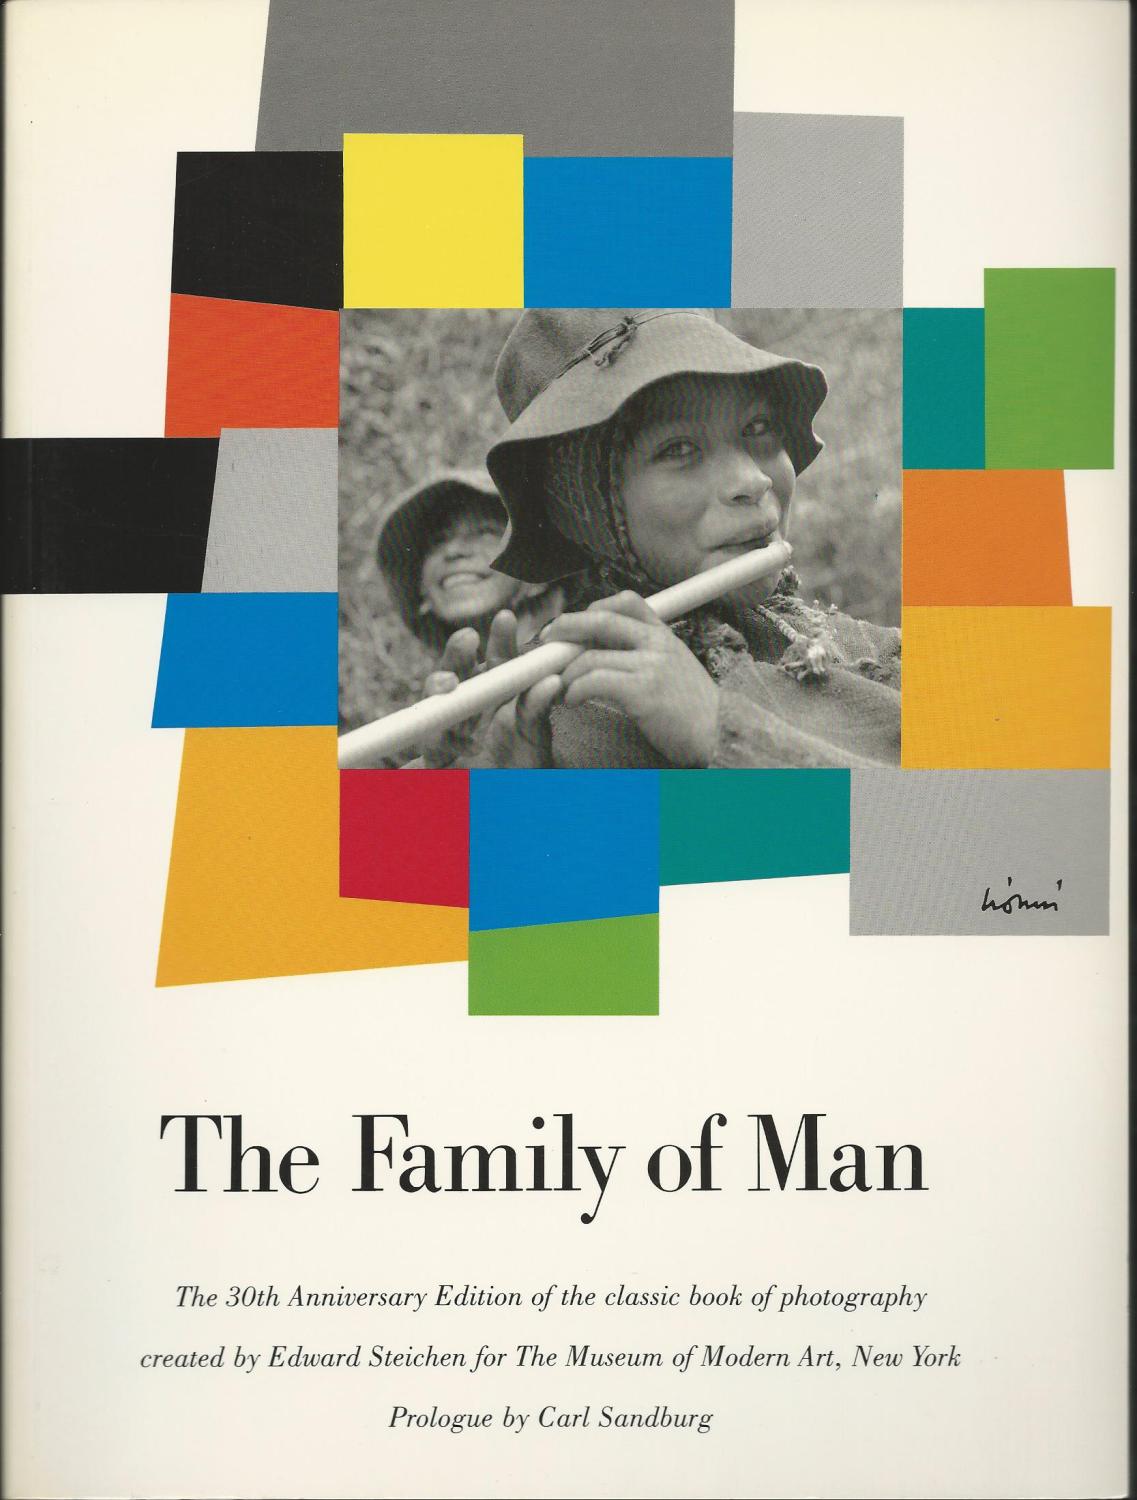 The Family of Man: The 30th Anniversary Edition of the Classic Book of Photography - Steichen, Edward. With Prologue By Carl Sandburg